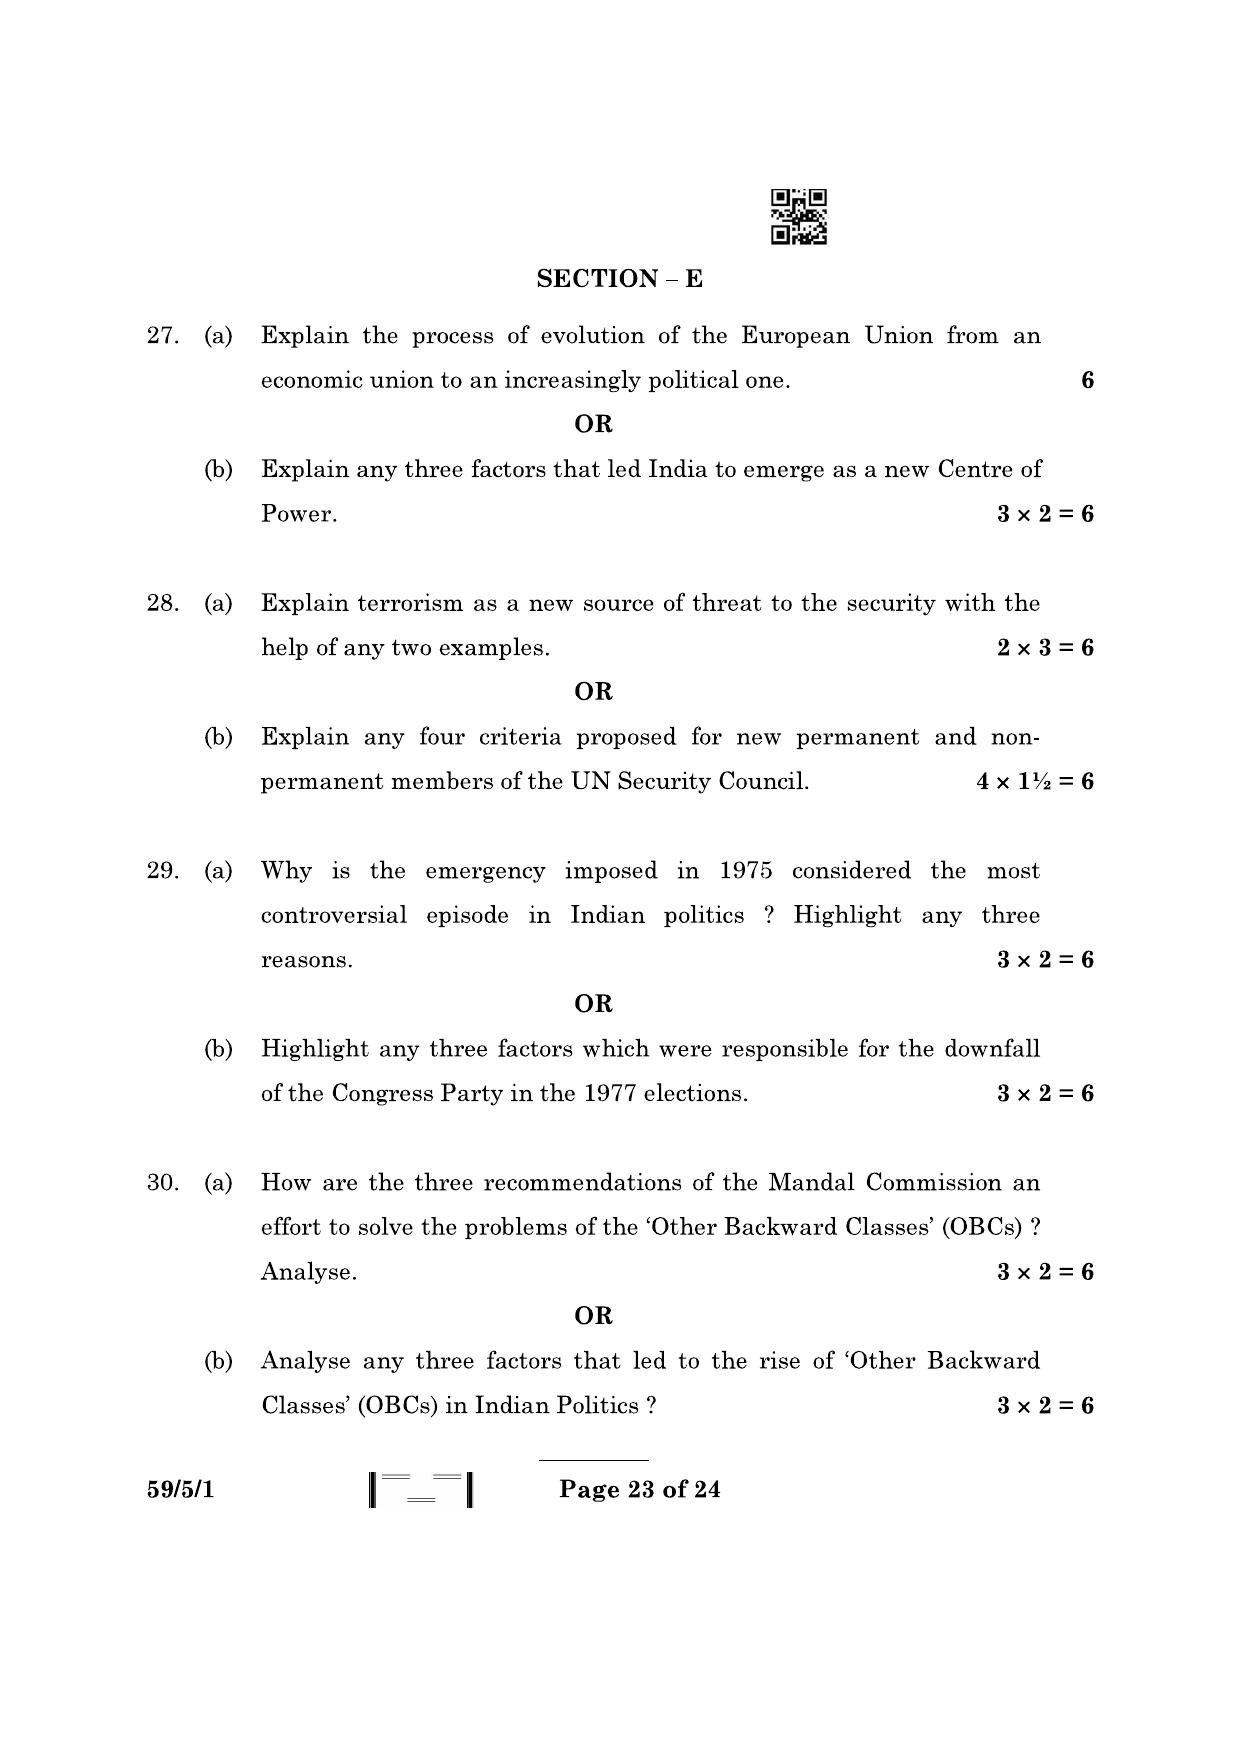 CBSE Class 12 59-5-1 Political Science 2023 Question Paper - Page 23